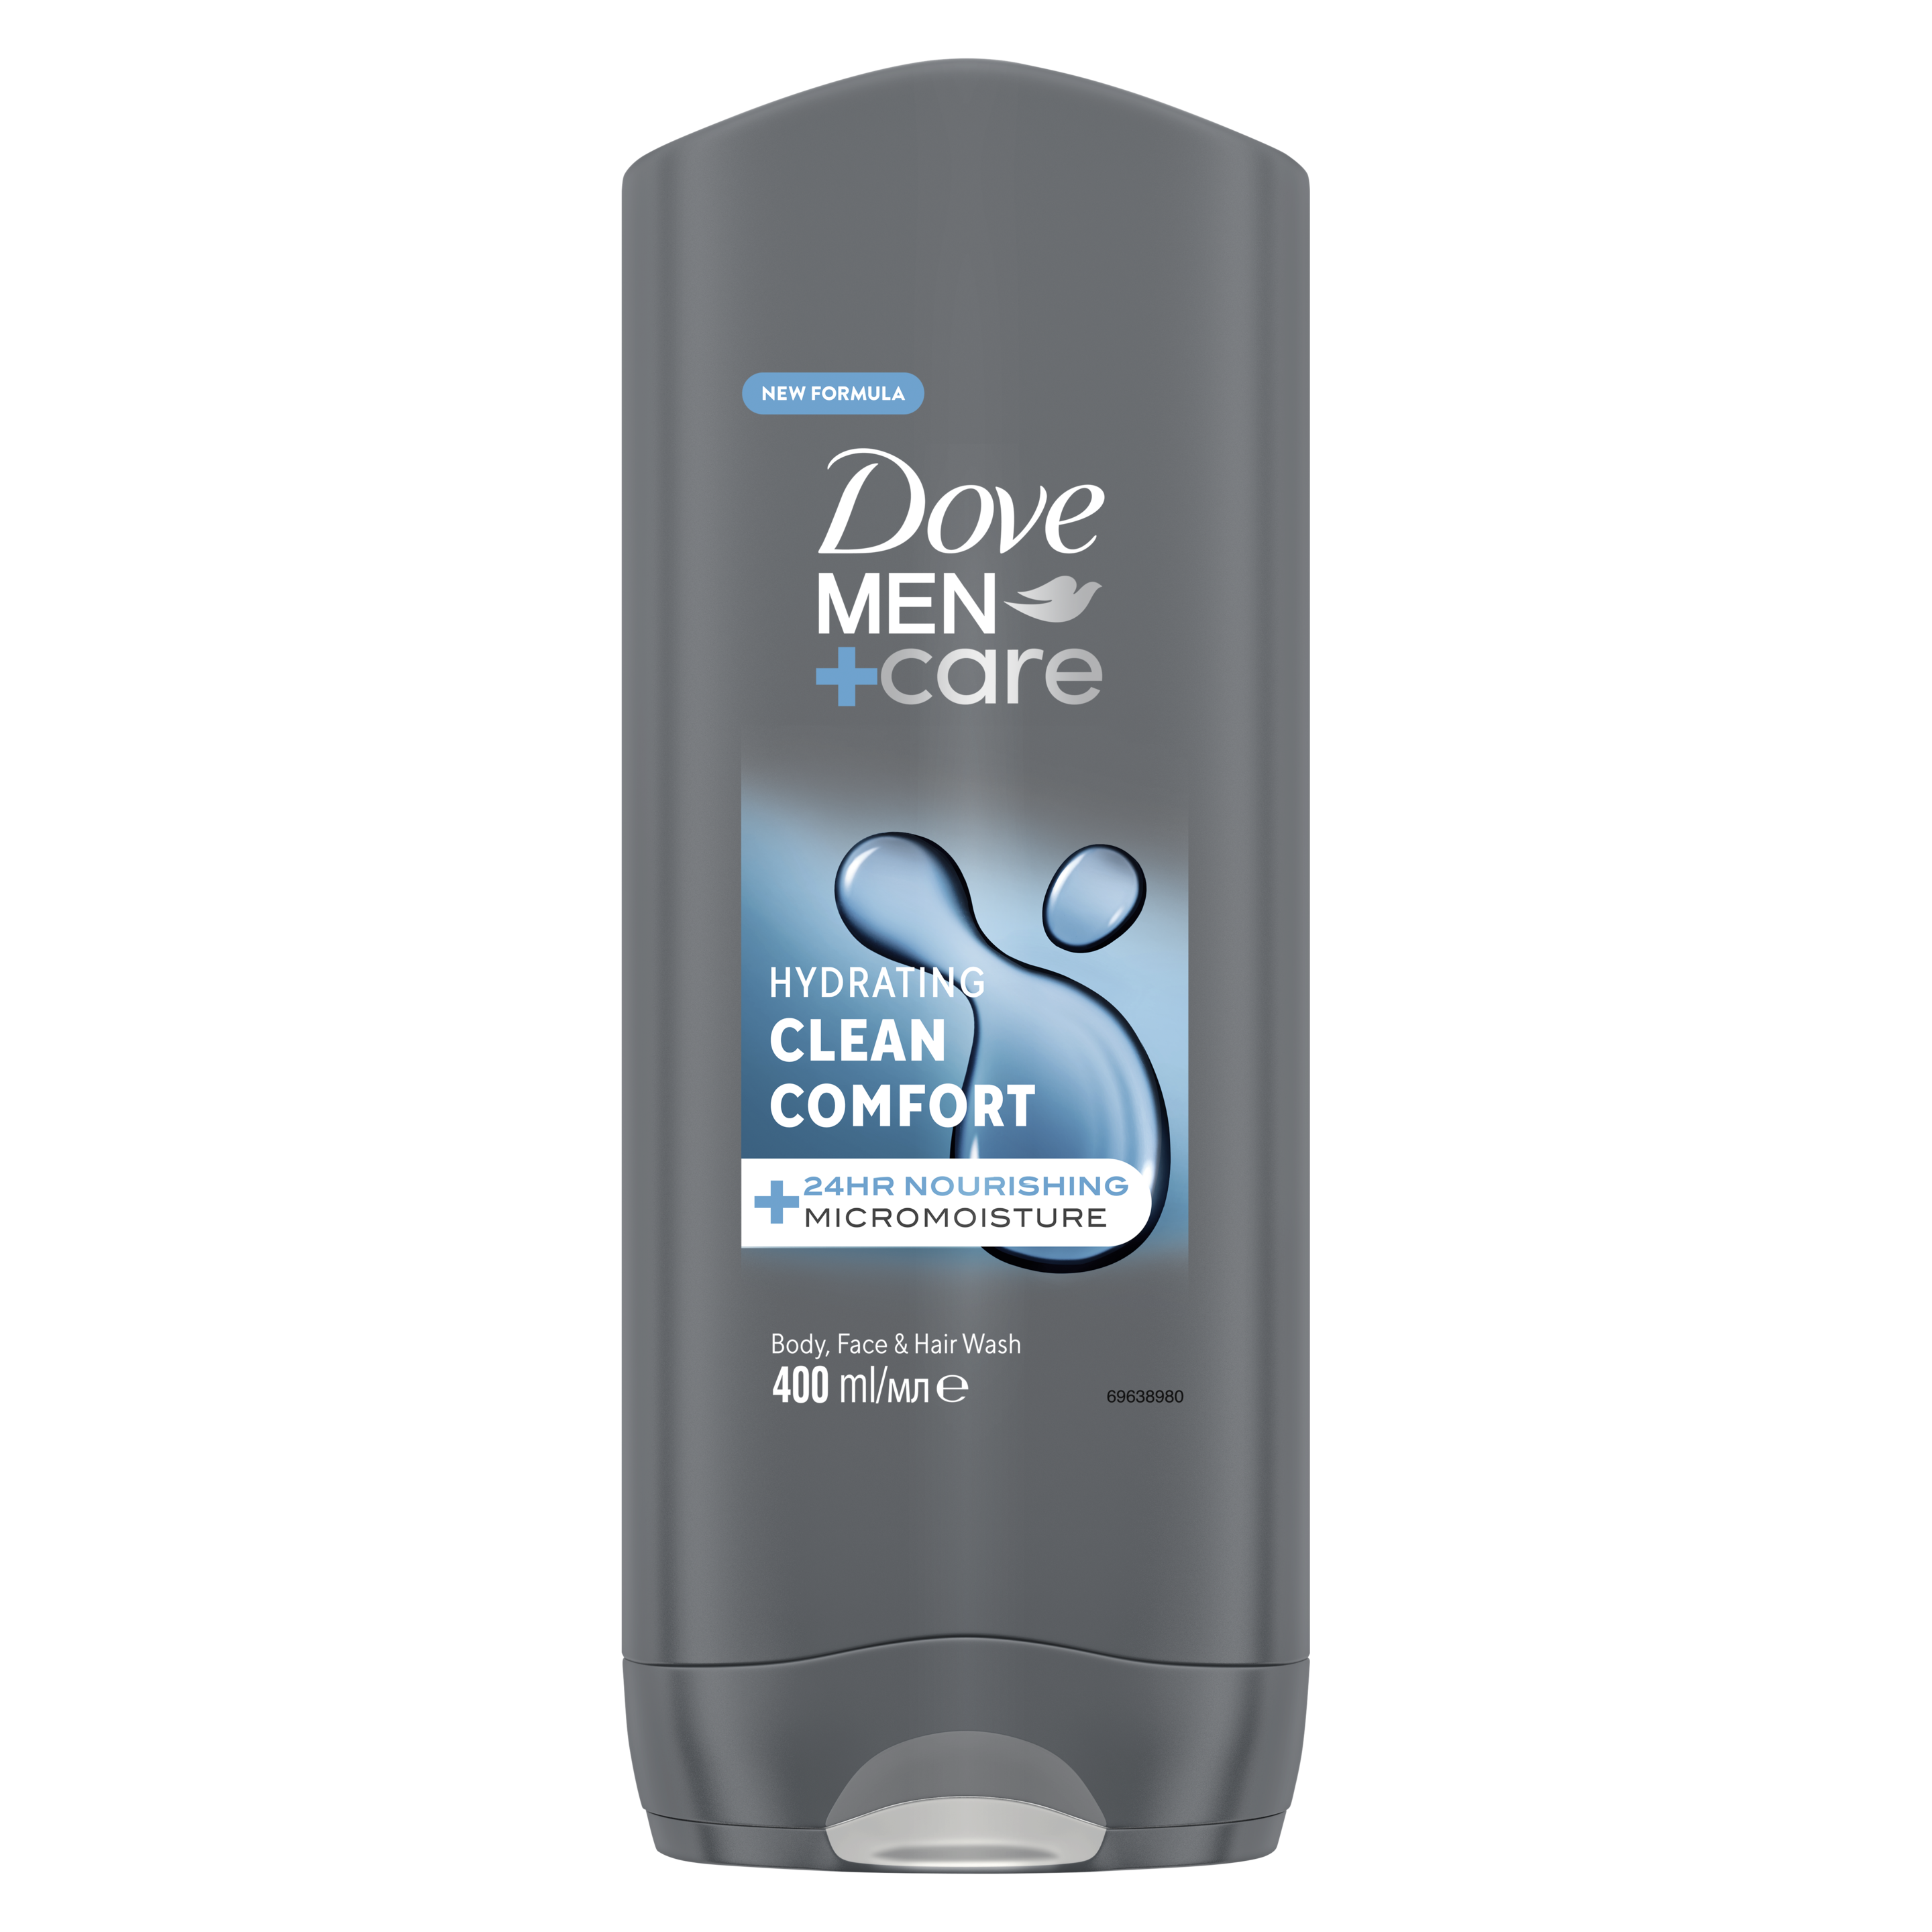 Dove Men+Care Hydrating Clean Comfort 3-in-1 Body, Face + Hair Wash